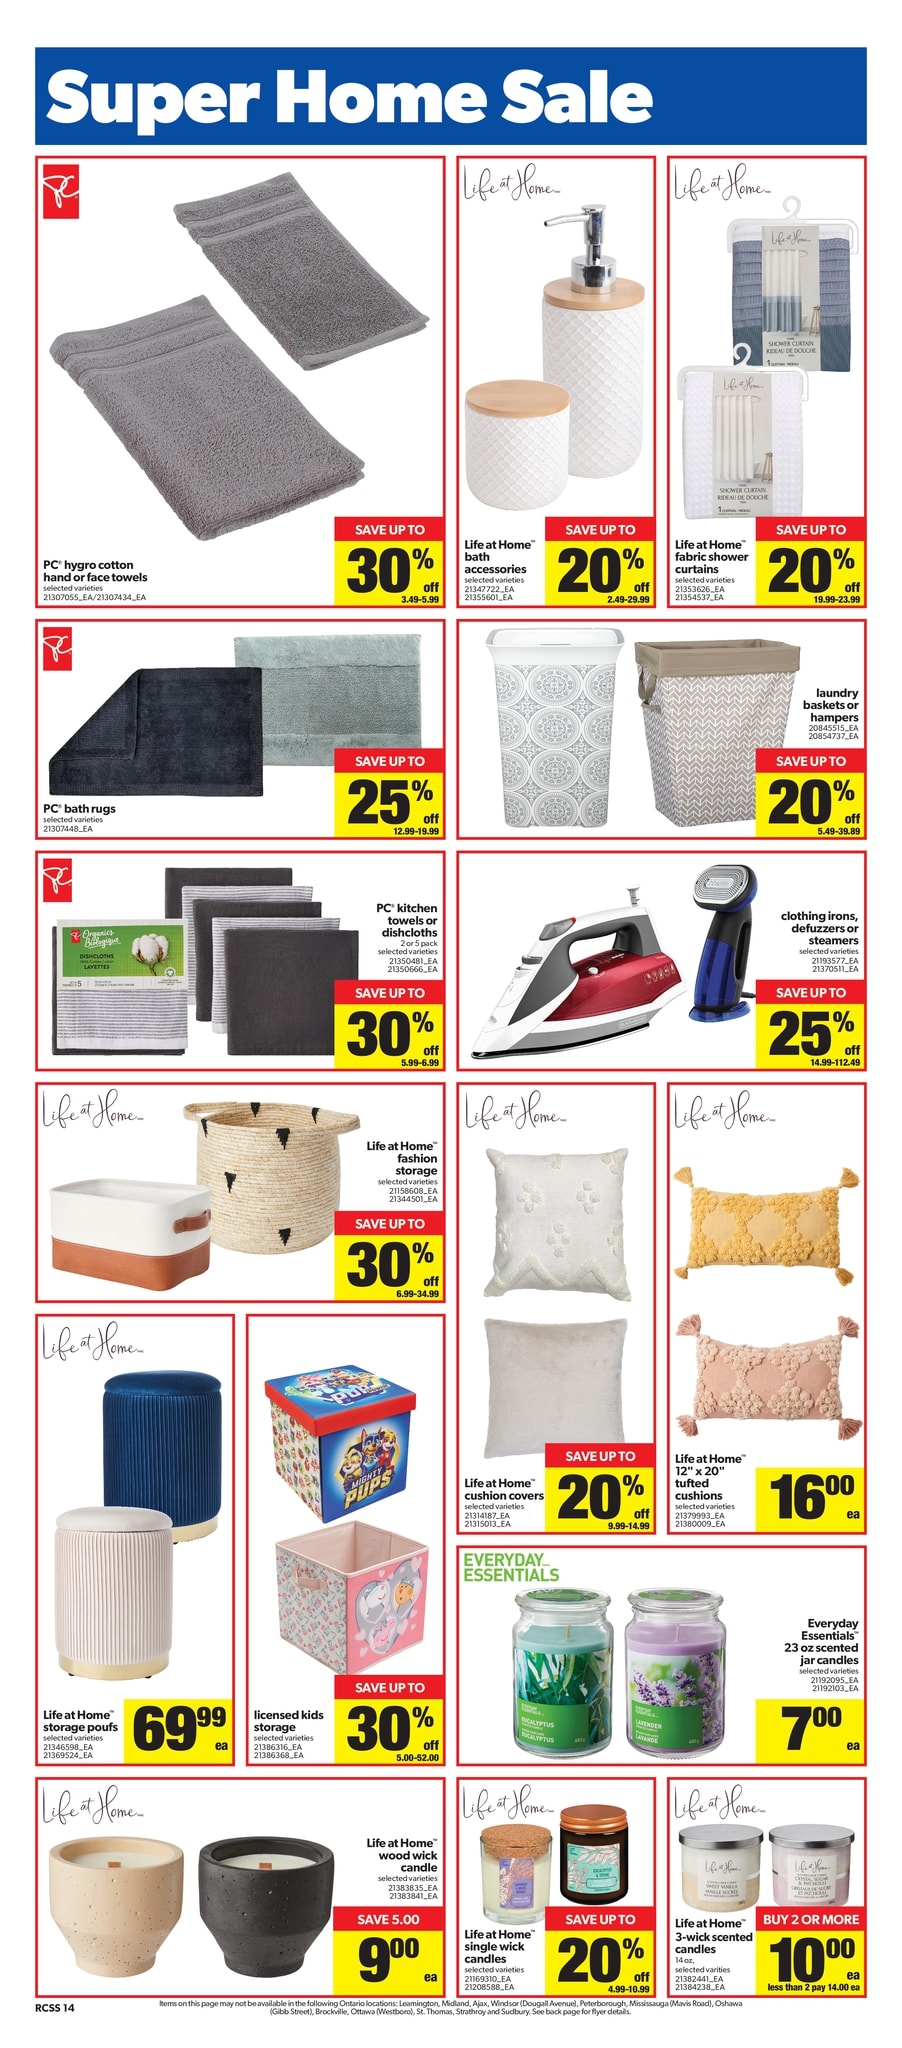 Real Canadian Superstore Ontario - Weekly Flyer Specials - Page 14